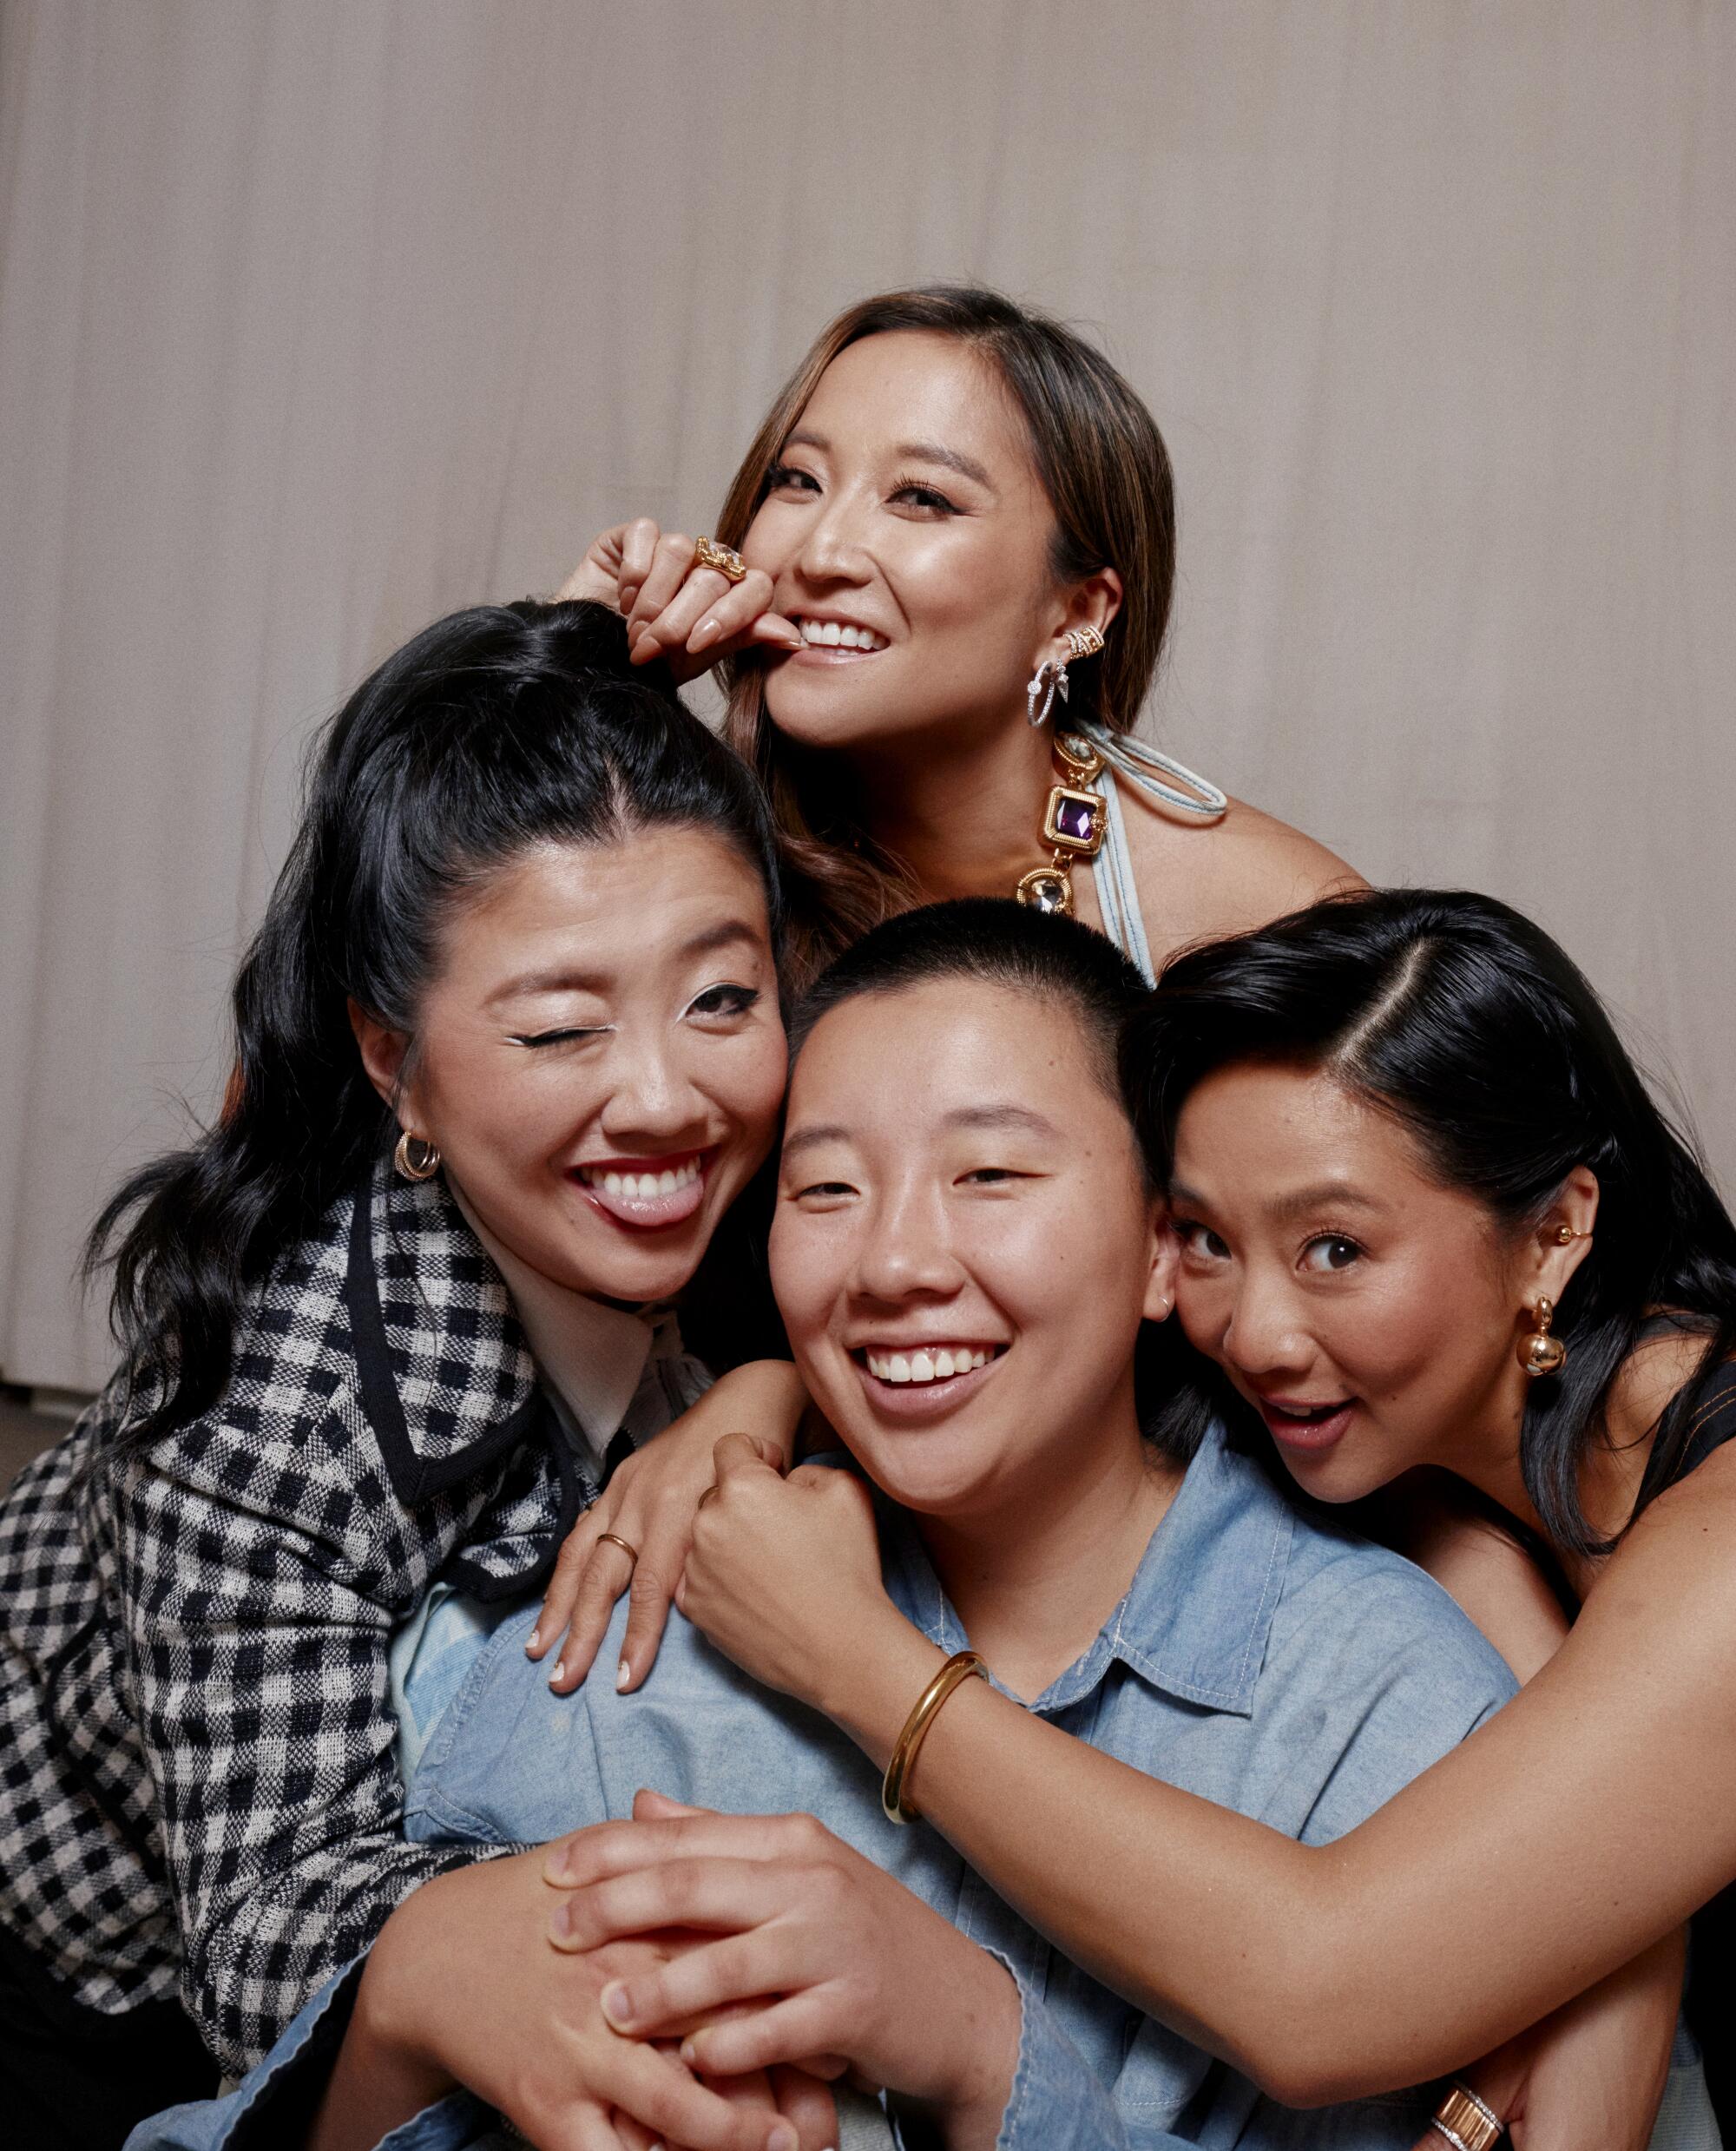 Four women hug and pose for the camera